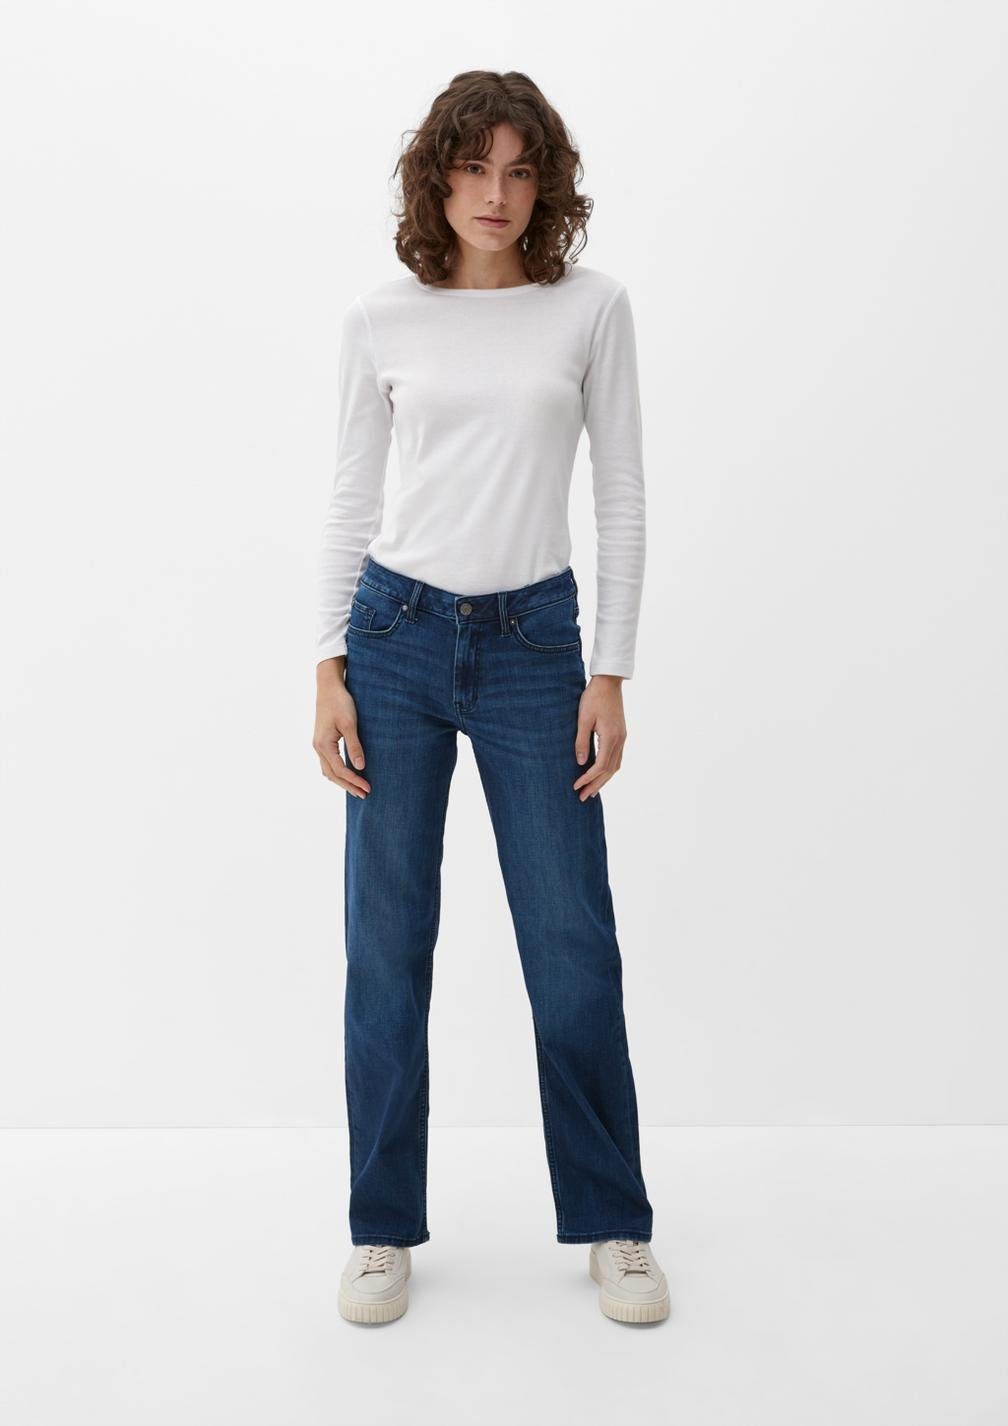 s.Oliver Comfort-fit-Jeans KAROLIN / mit Relaxed tiefblau Straight rise Leg / Fit Waschung, Mid leichter